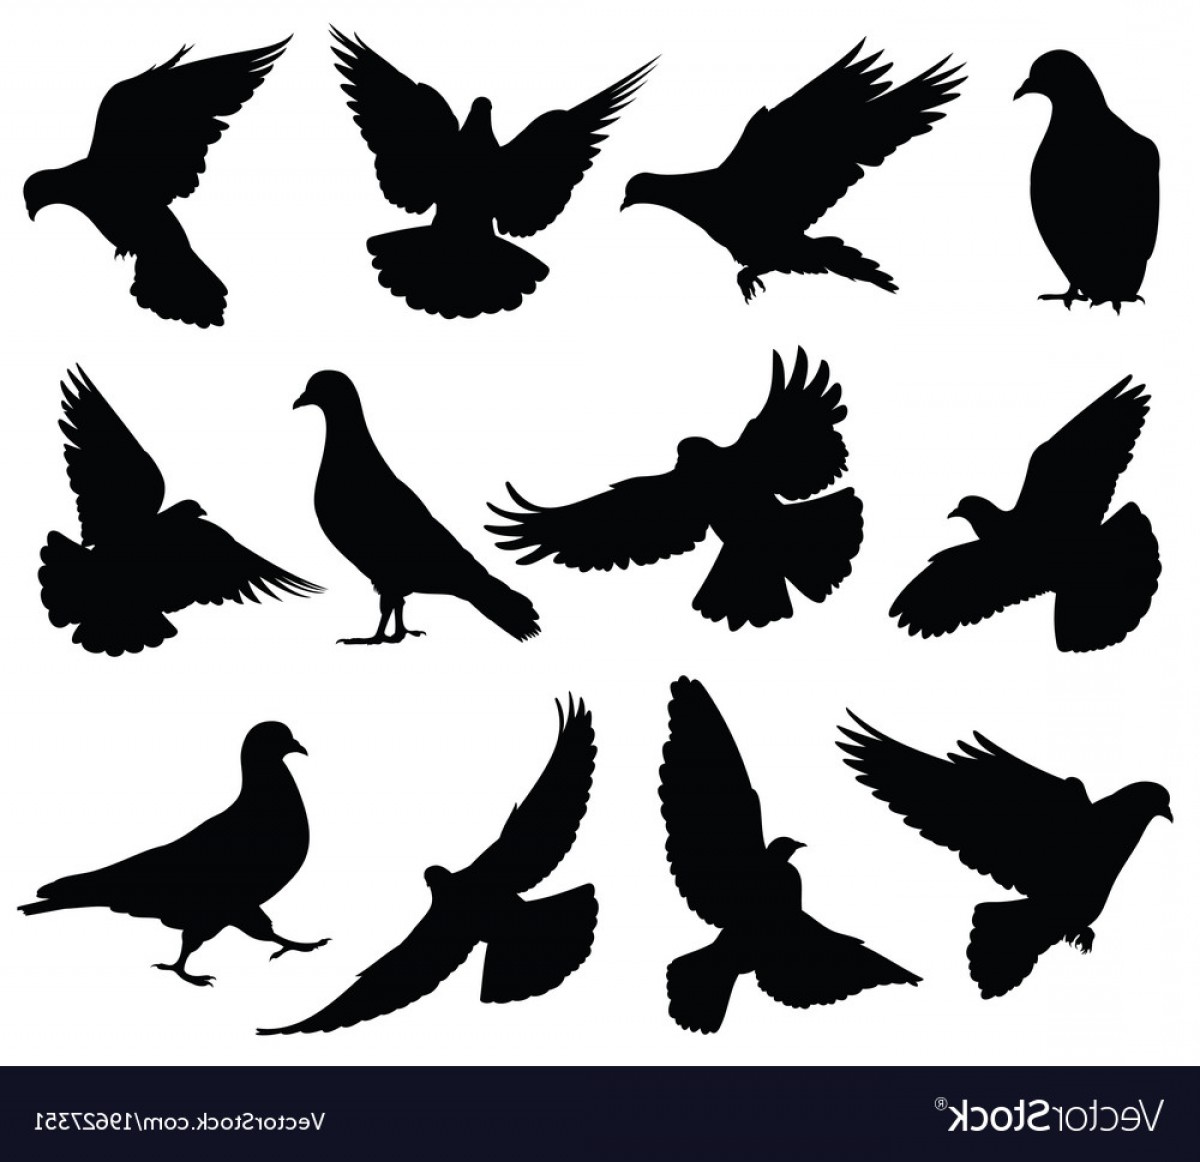 Dove Silhouette Vector At Collection Of Dove Silhouette Vector Free For